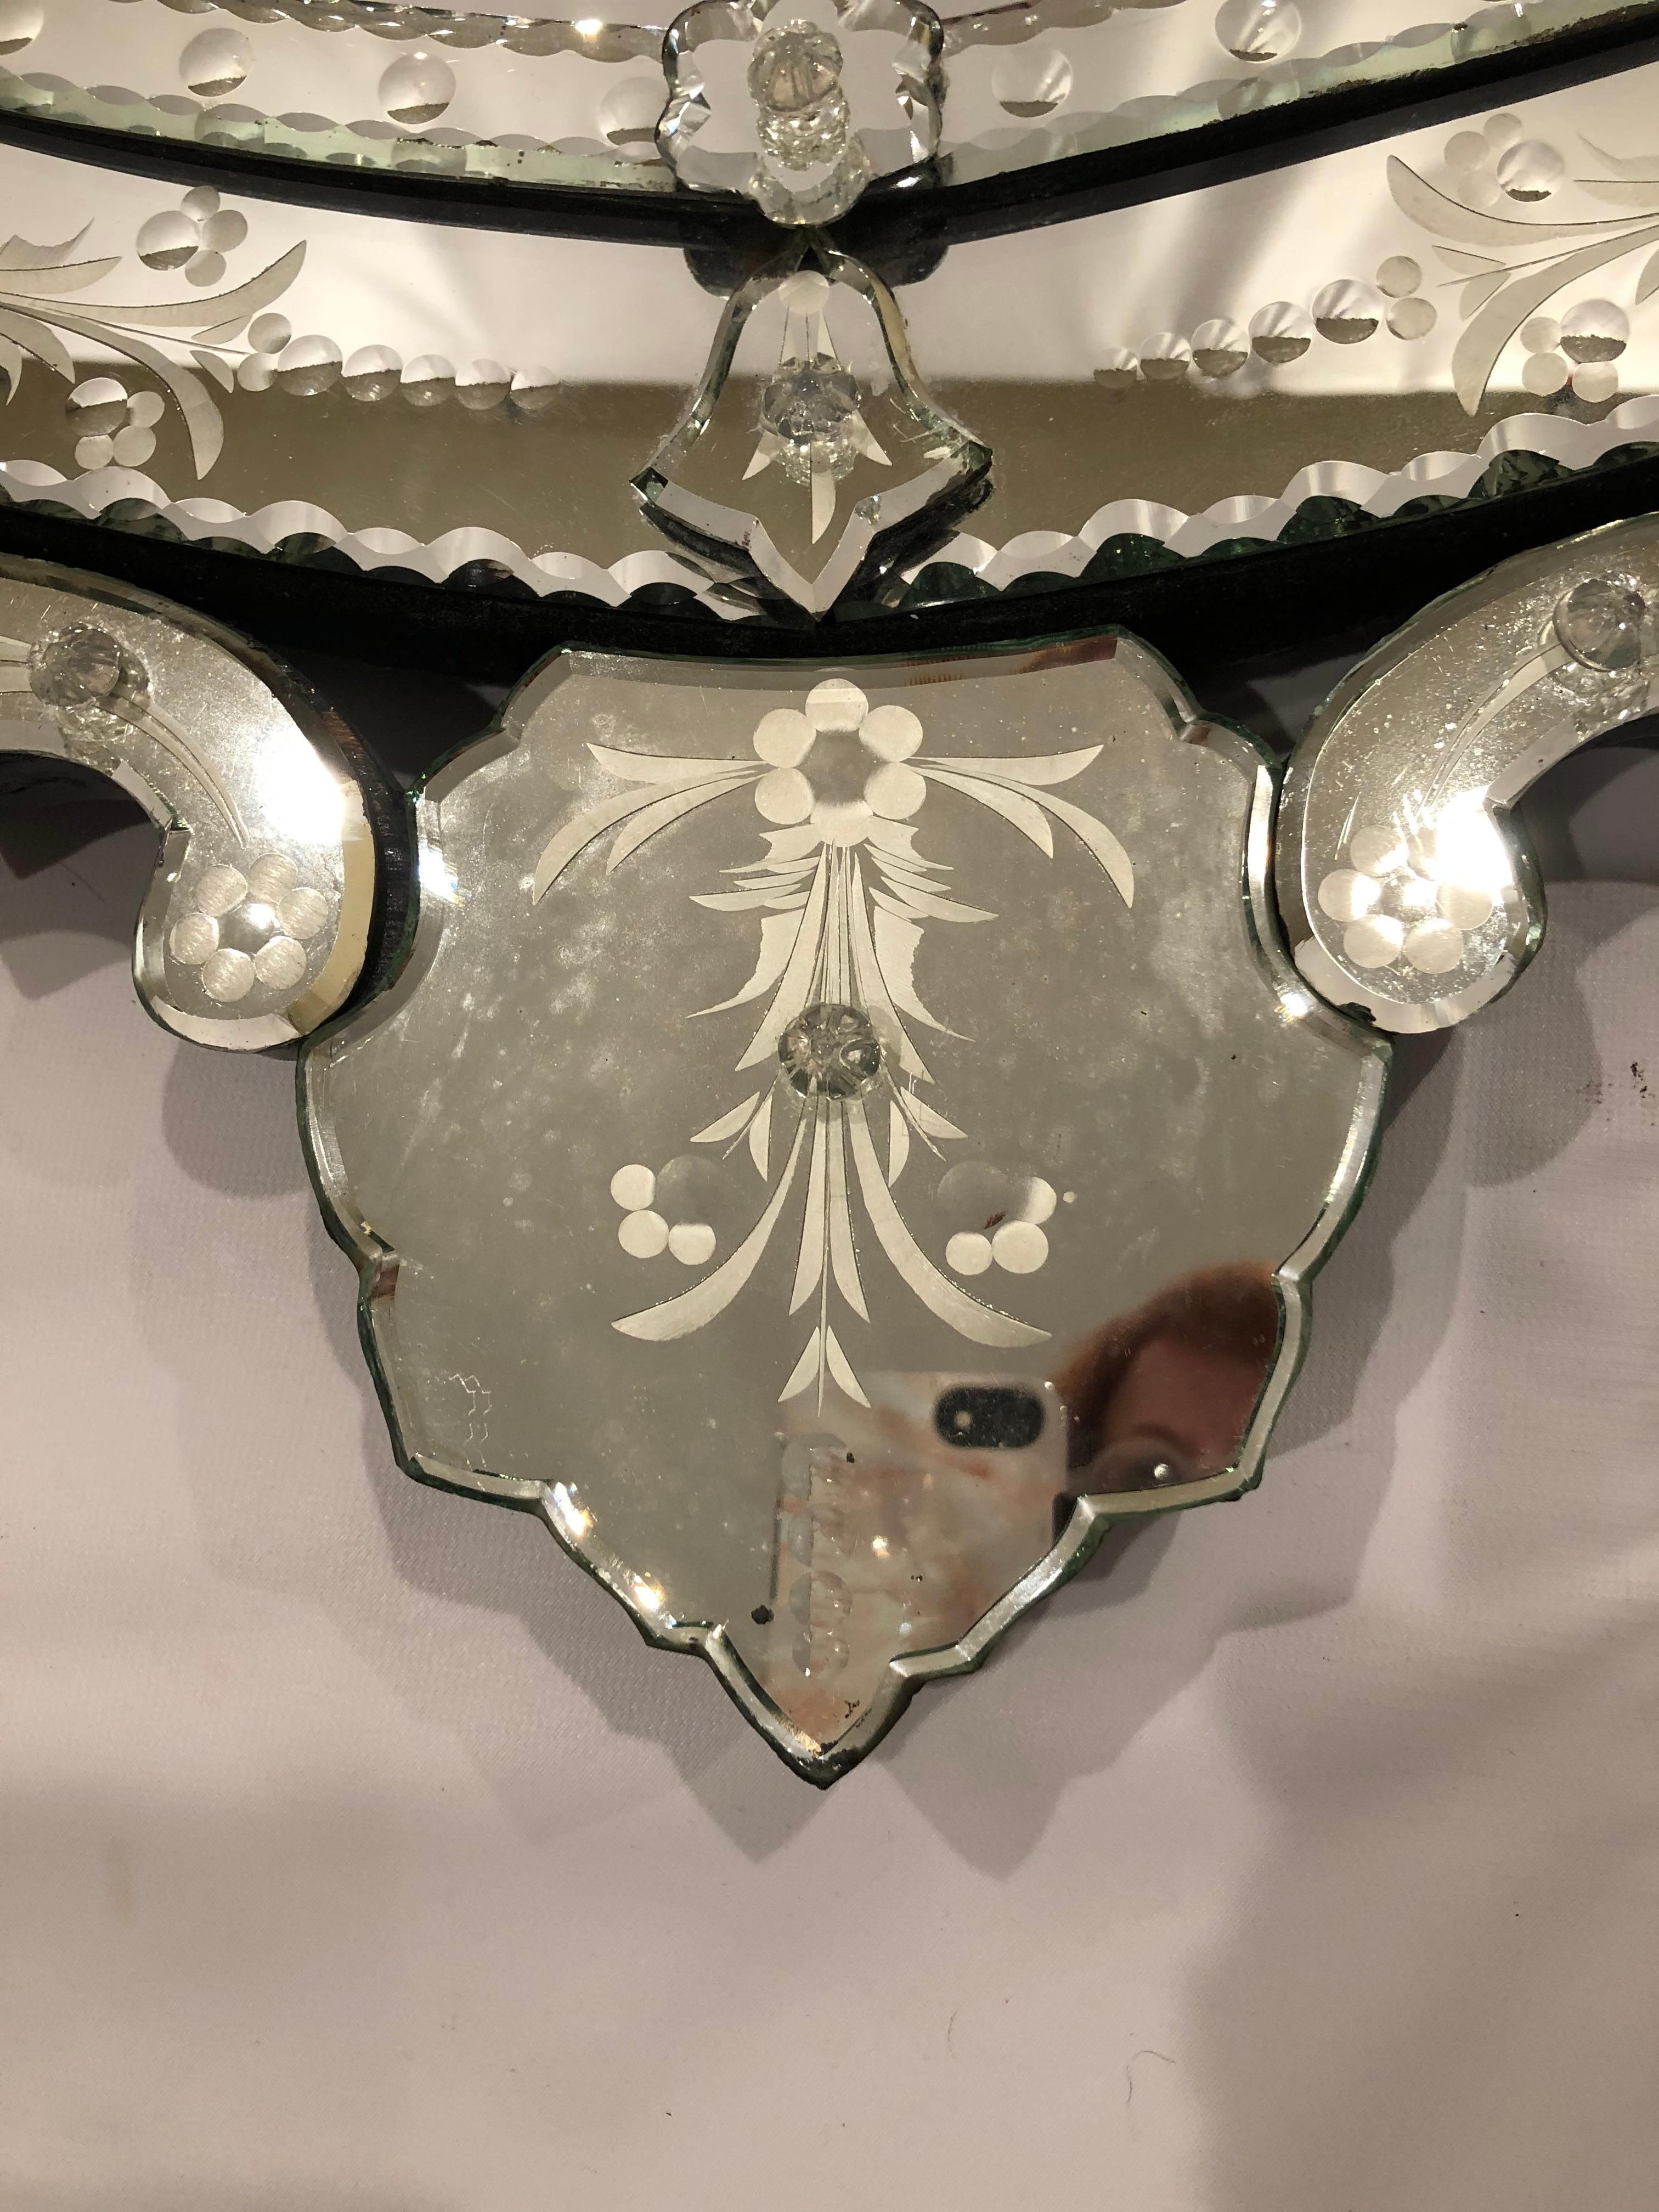 Glamorous pear shaped meticulously detailed Venetian style mirror having ornate crest and lovely etching around the frame.